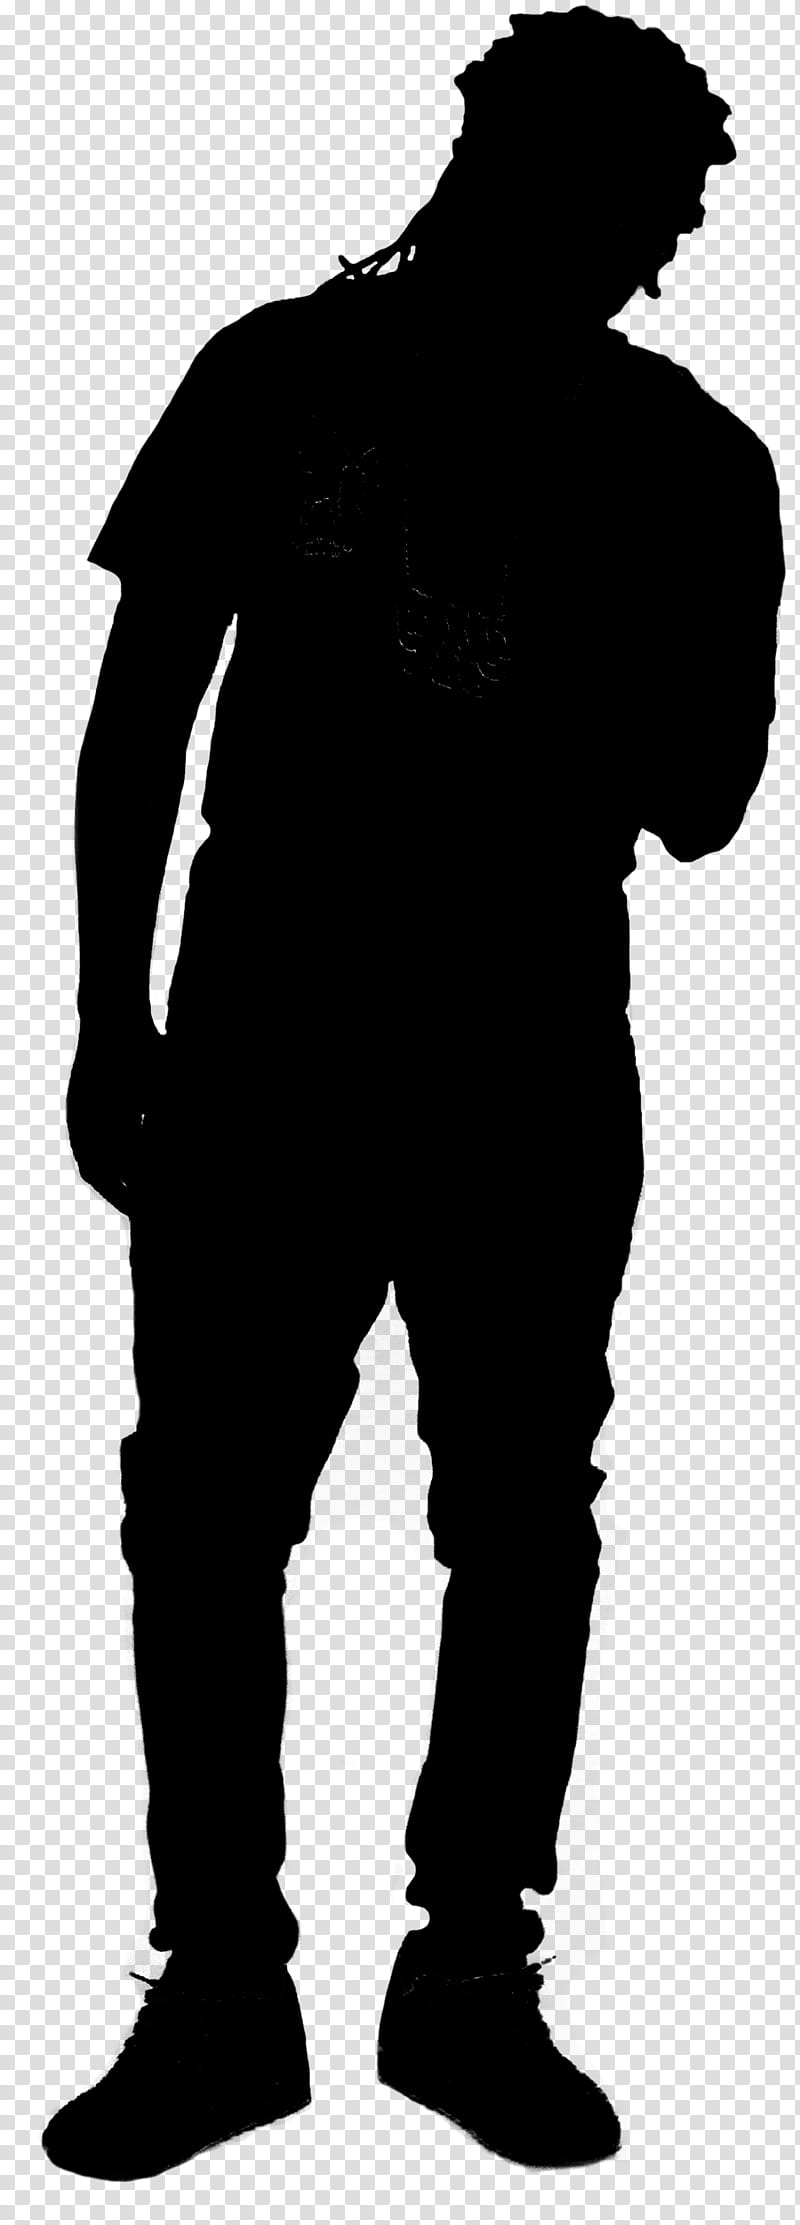 Male Standing, Character, Silhouette, Headgear, Black M, Human, Blackandwhite, Trousers transparent background PNG clipart